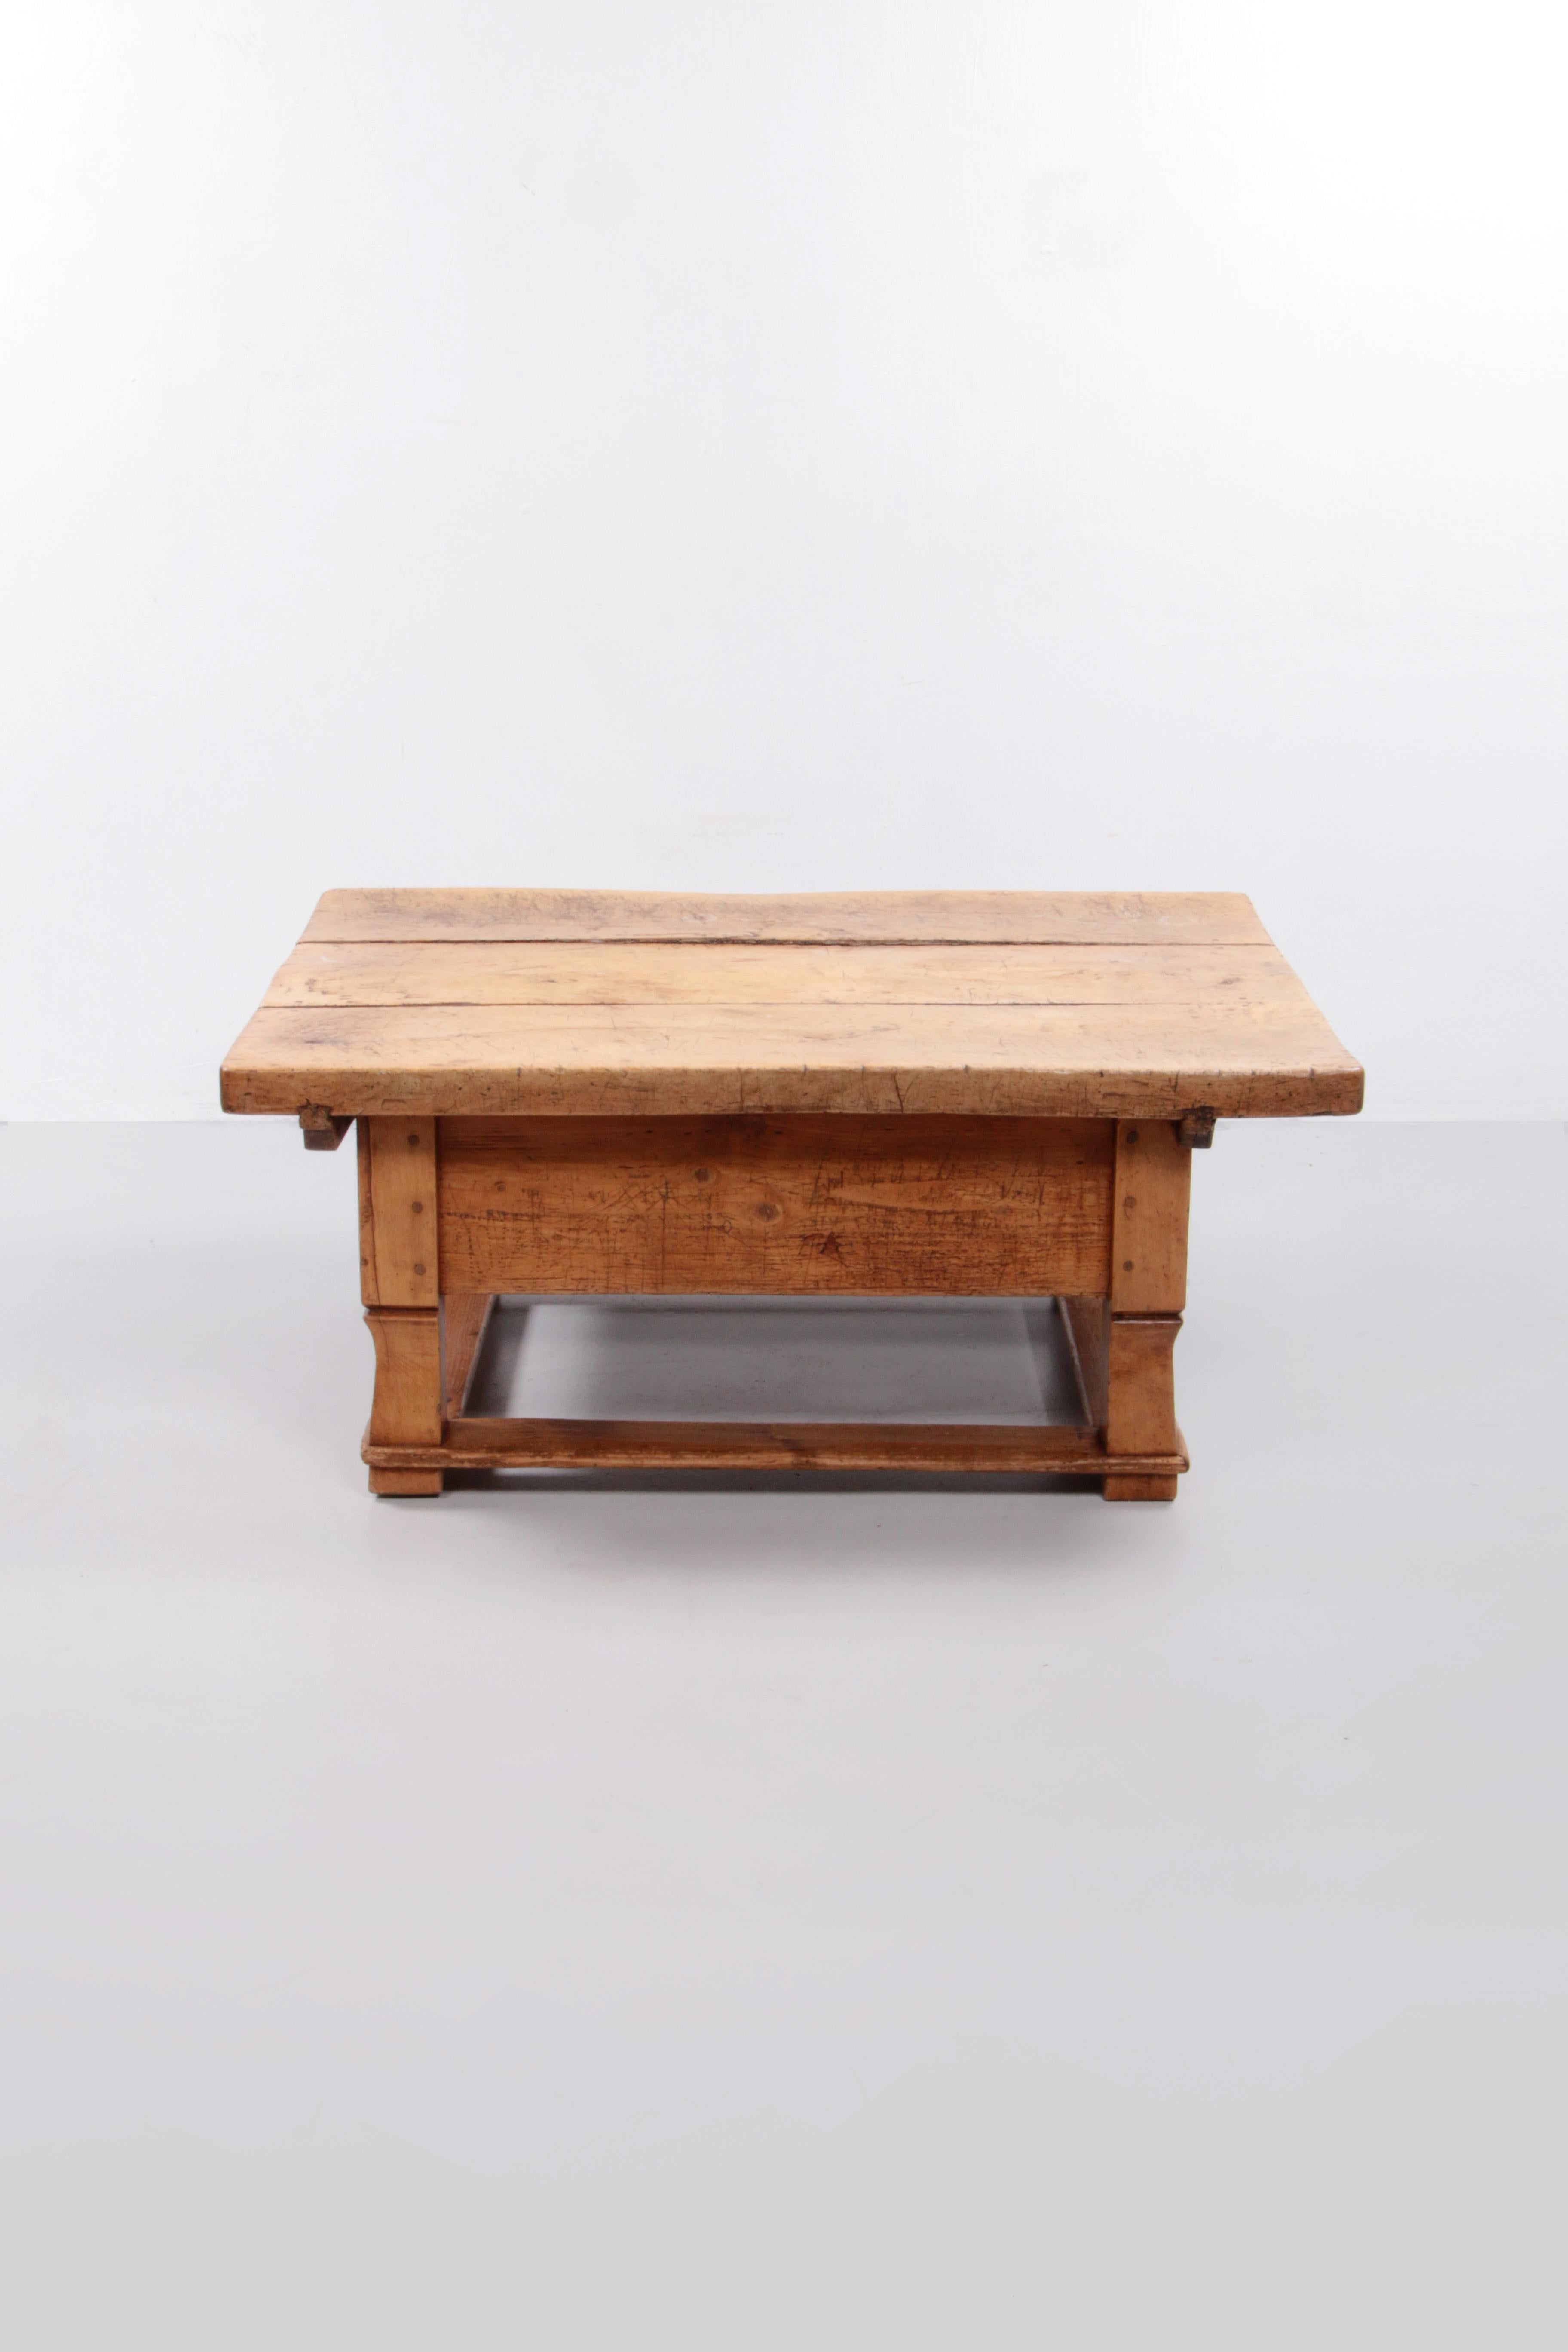 Austrian Coffee Table18- 19th Century Walnut Payment Table with Drawer, Austria For Sale 1